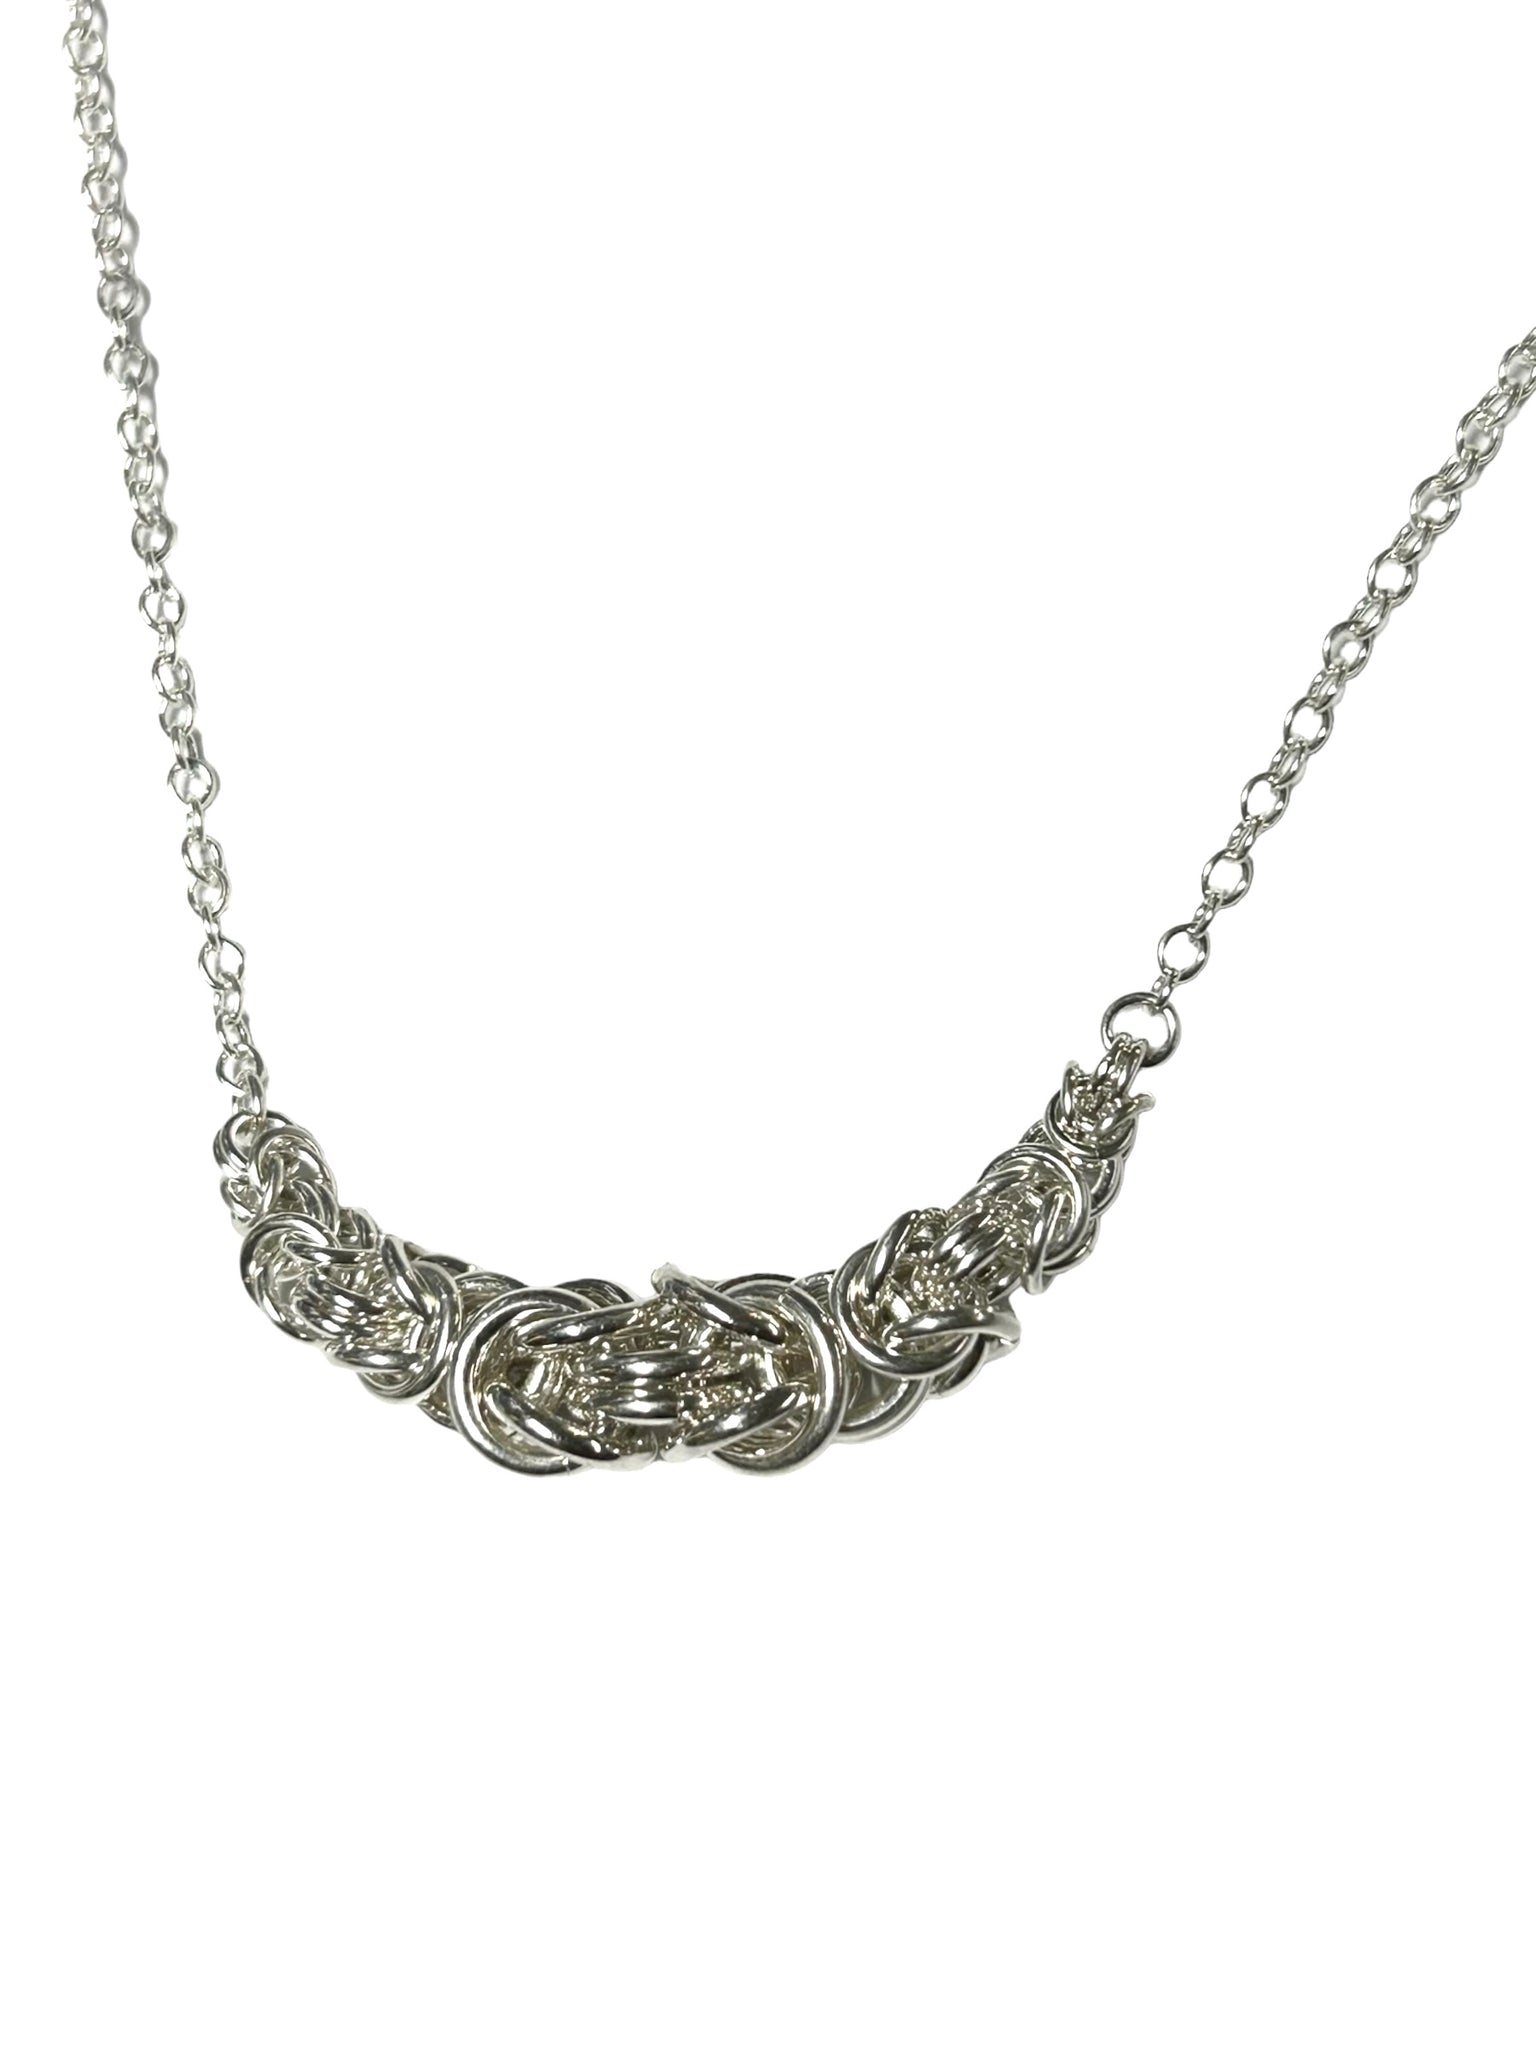 Persian Size Gradation Necklace in Sterling Silver